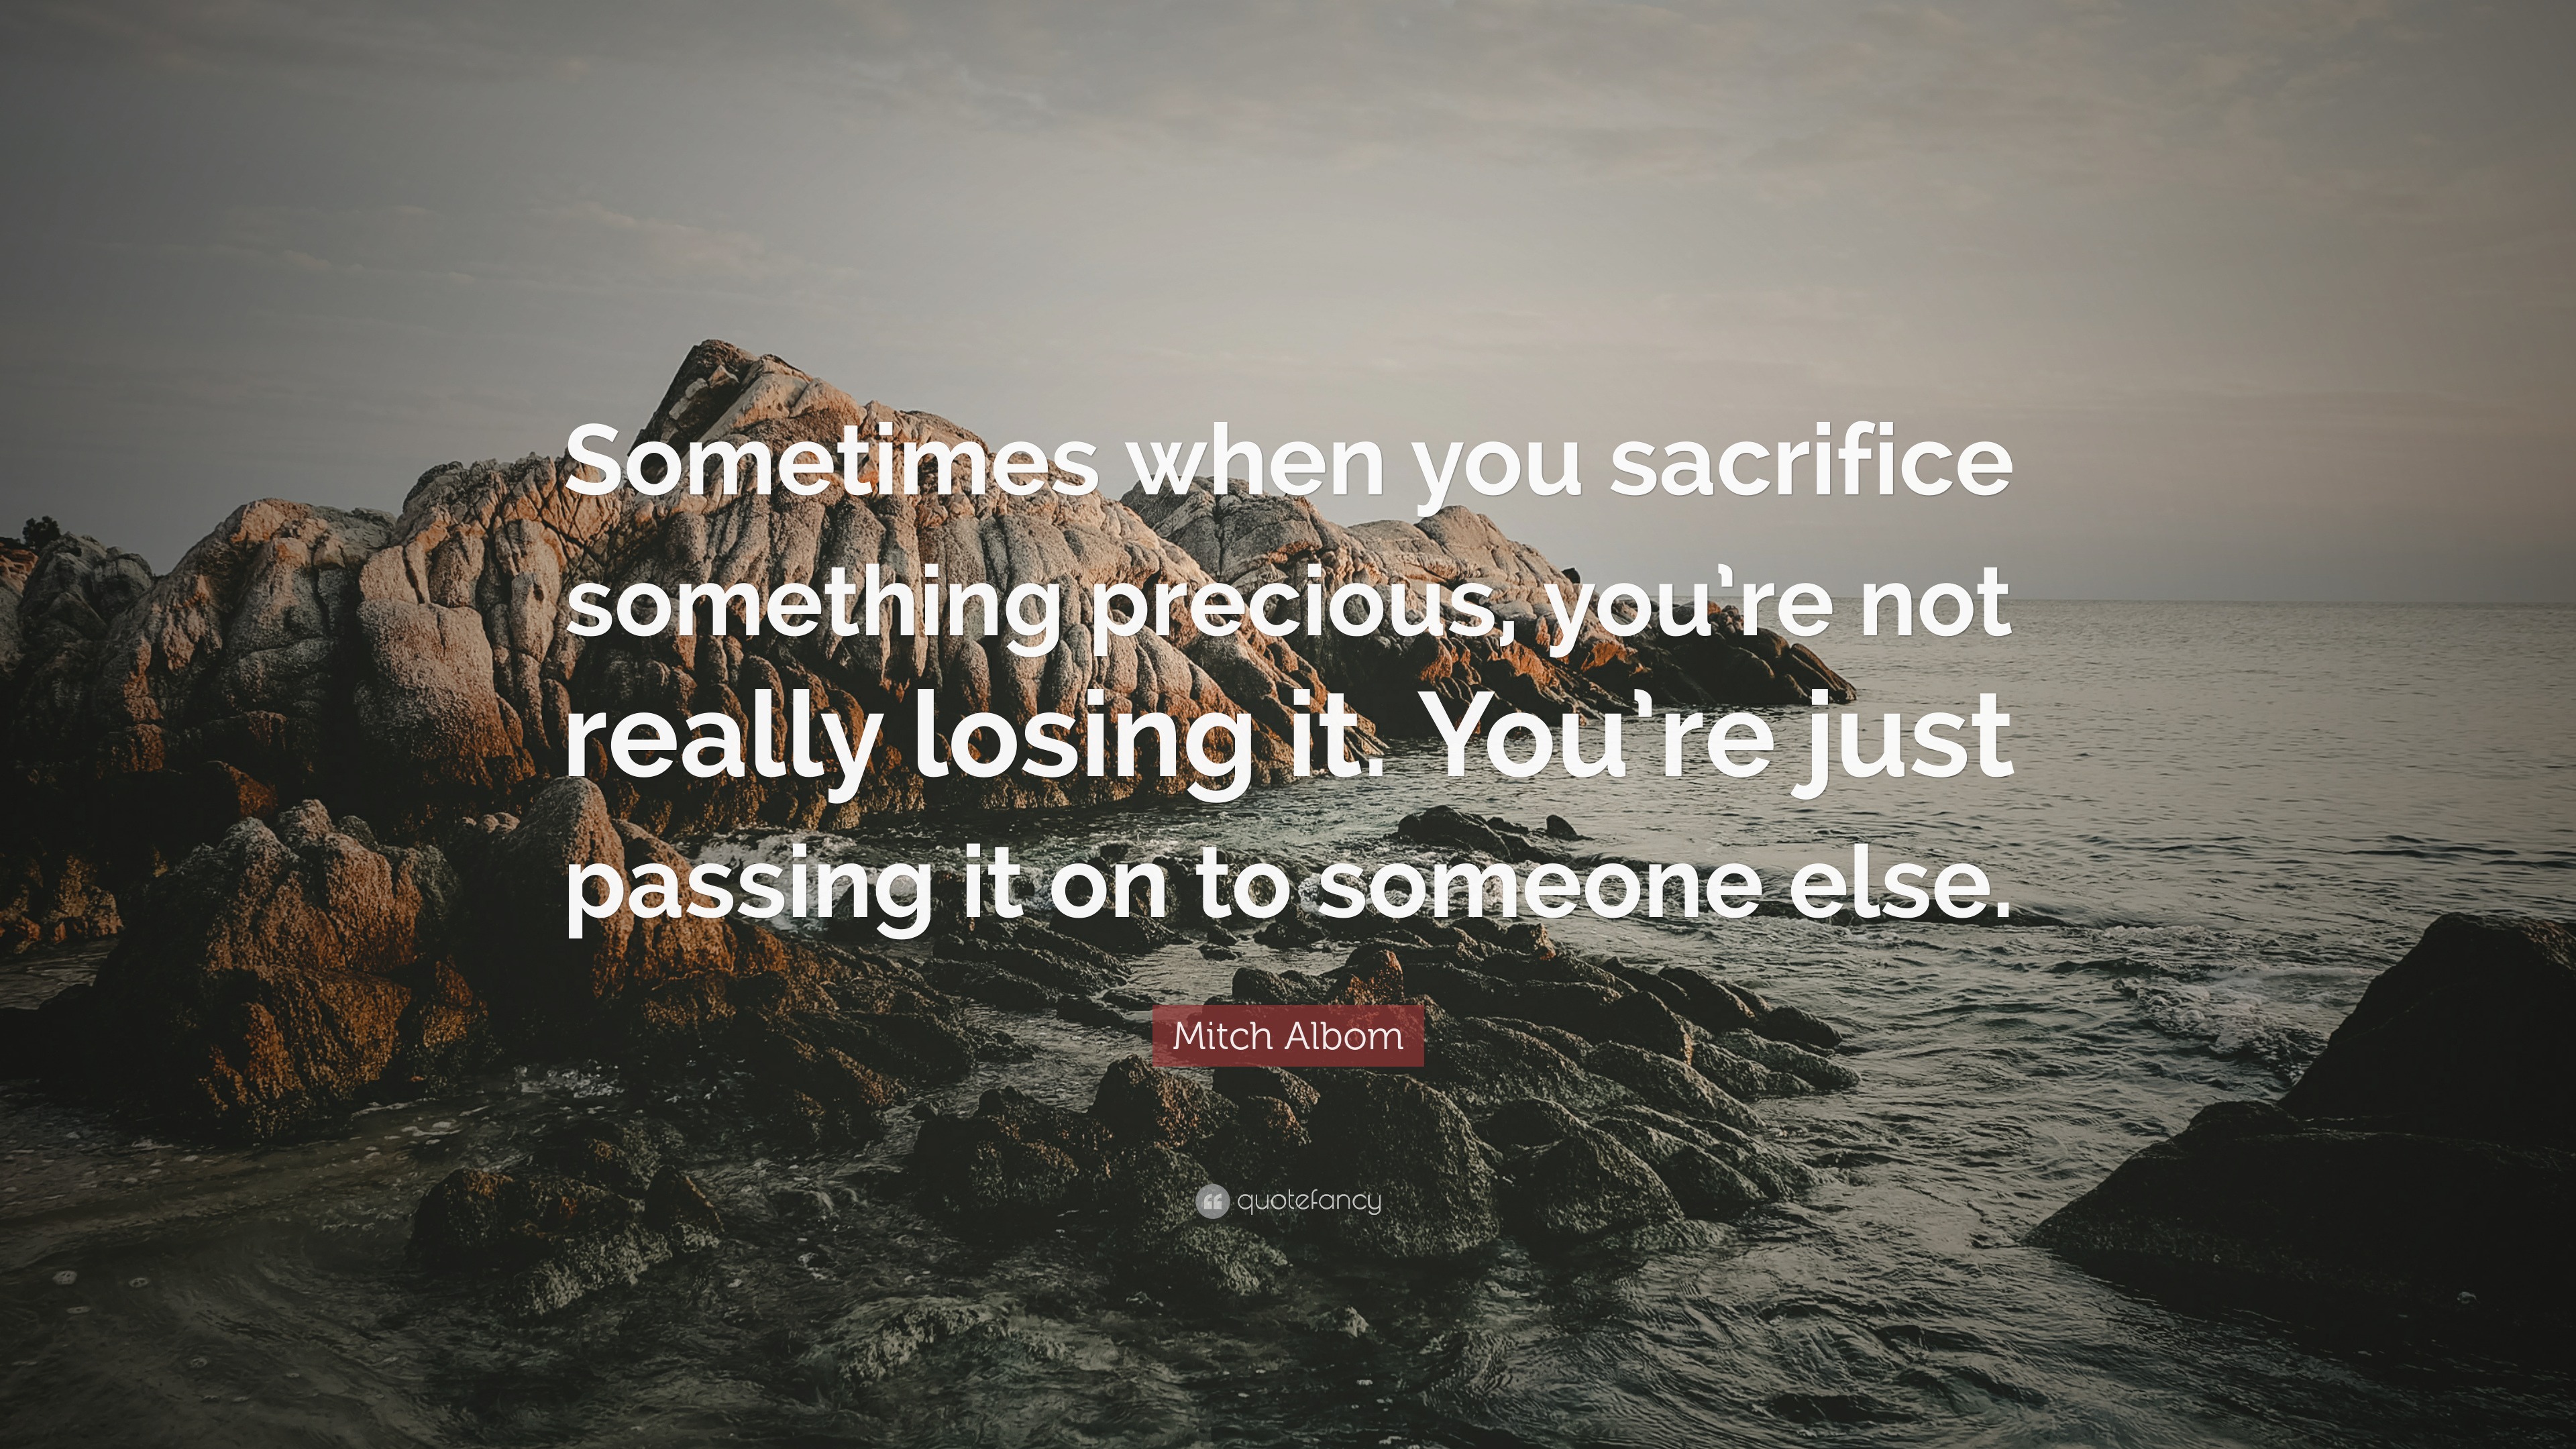 Mitch Albom Quote “sometimes When You Sacrifice Something Precious Youre Not Really Losing It 